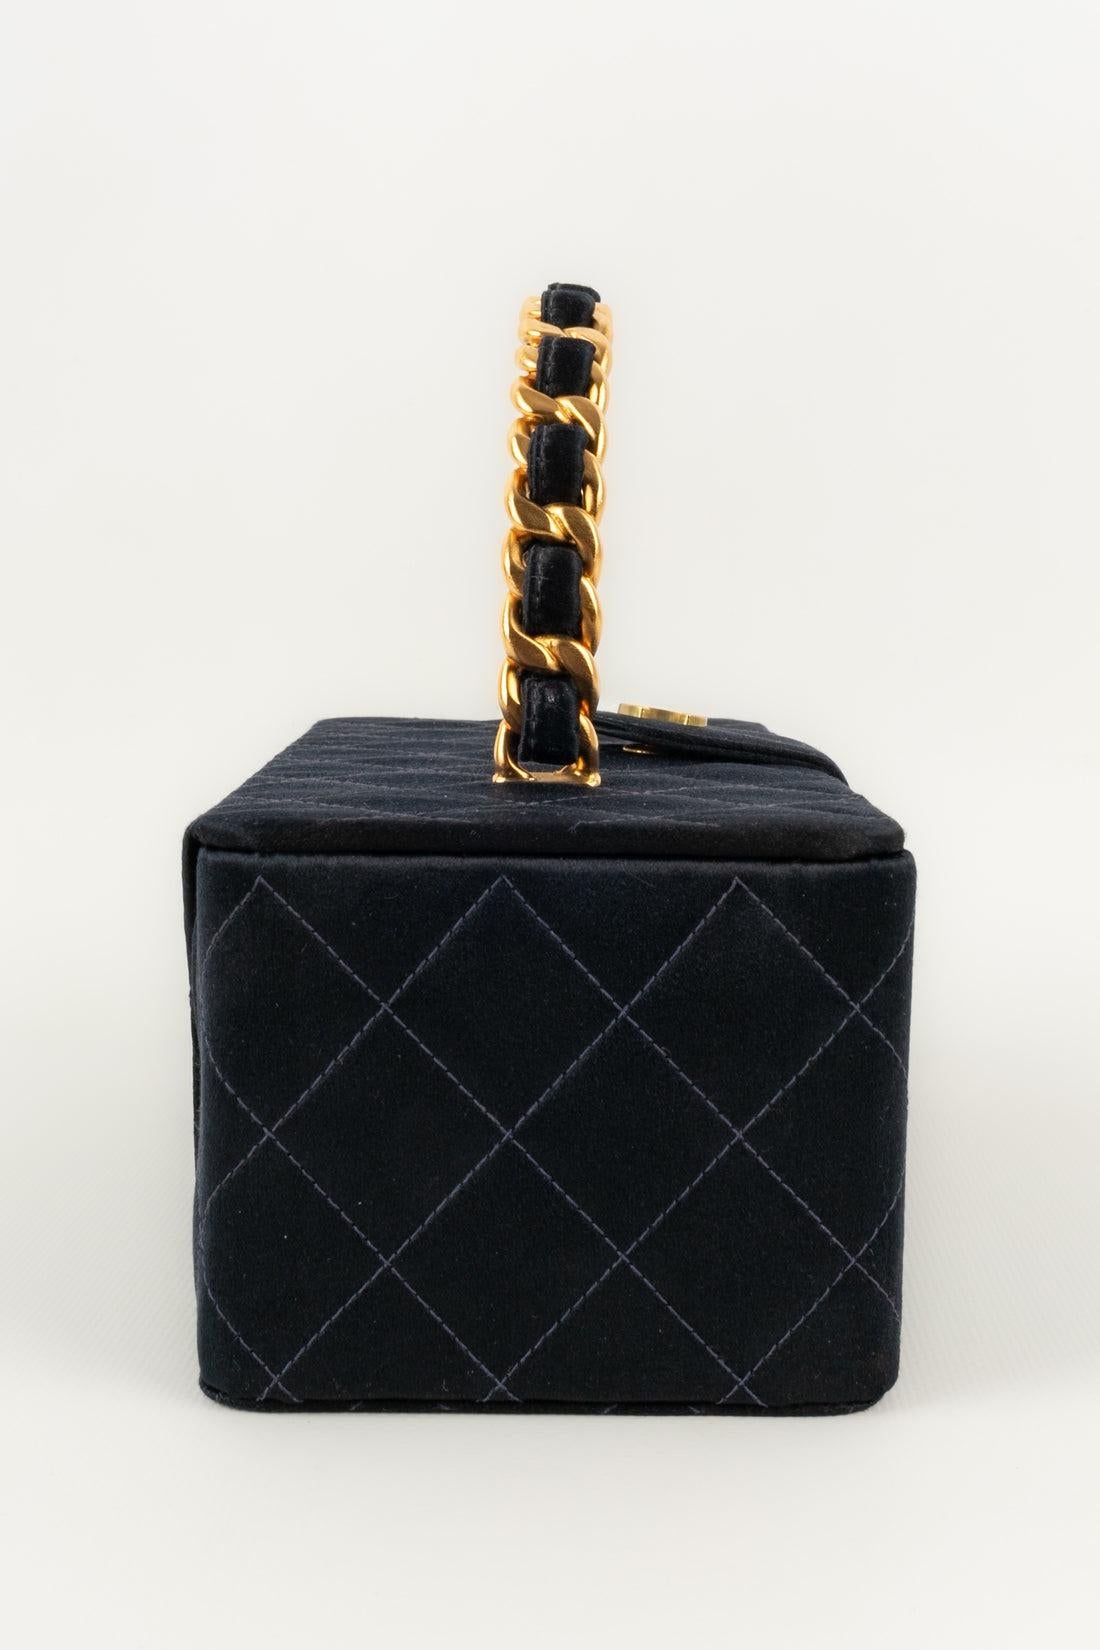 Chanel Quilted Silk Satin Bag with Golden Metal Elements, 1994/1996 1